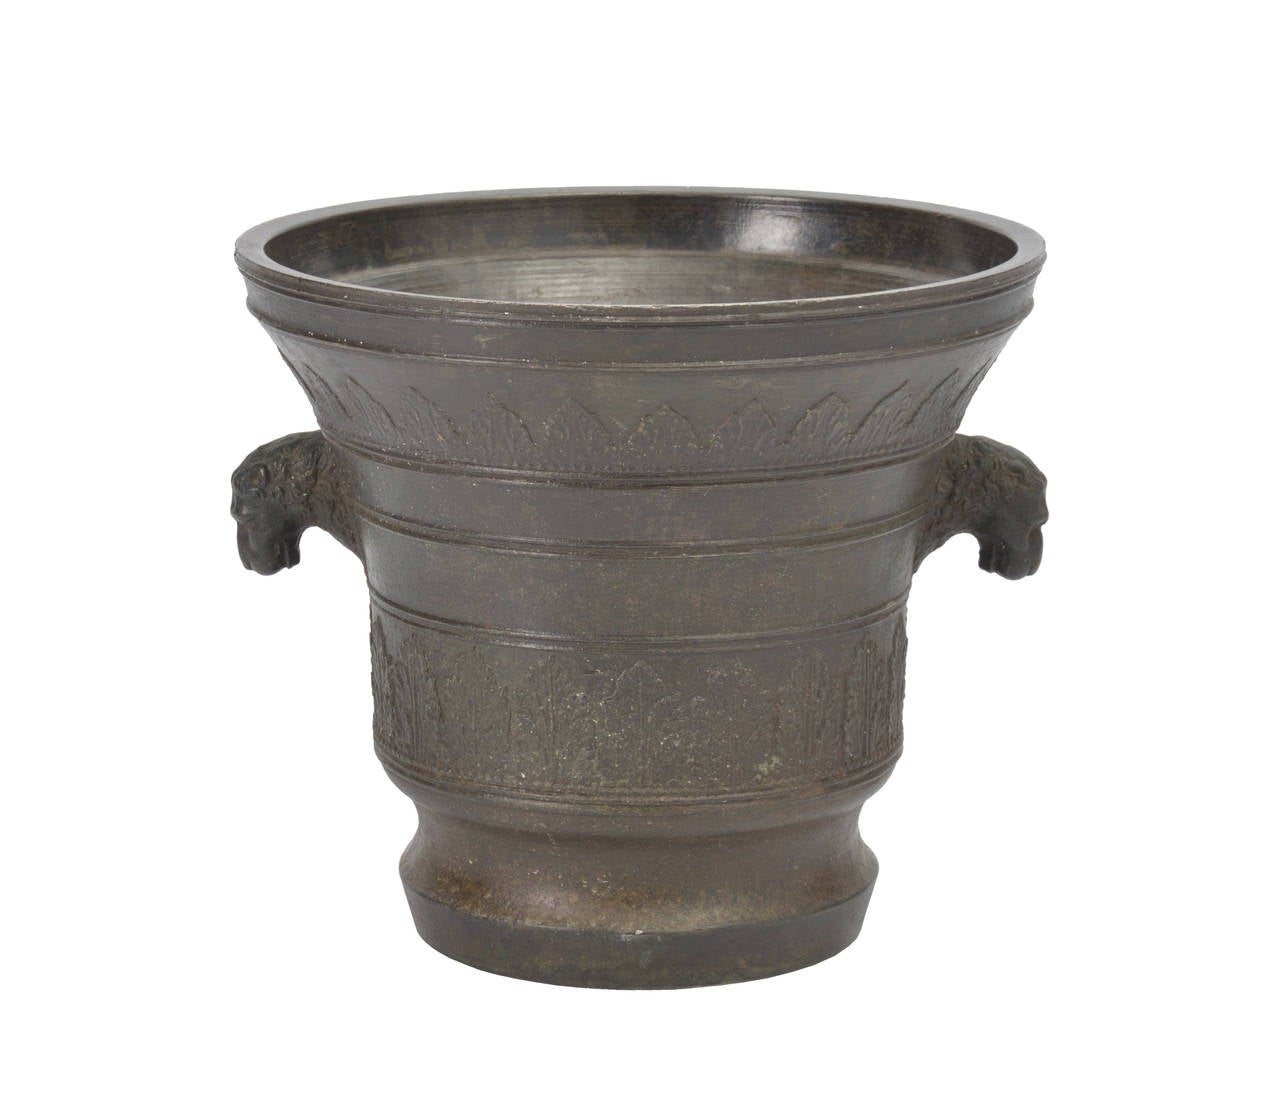 Very large bronze mortar, cast with two lion shaped knop handles, with a rich decorated frieze and inscribed: Gio Cavadini f ver a, anno 1858.

Mortar has a nice dark patina.